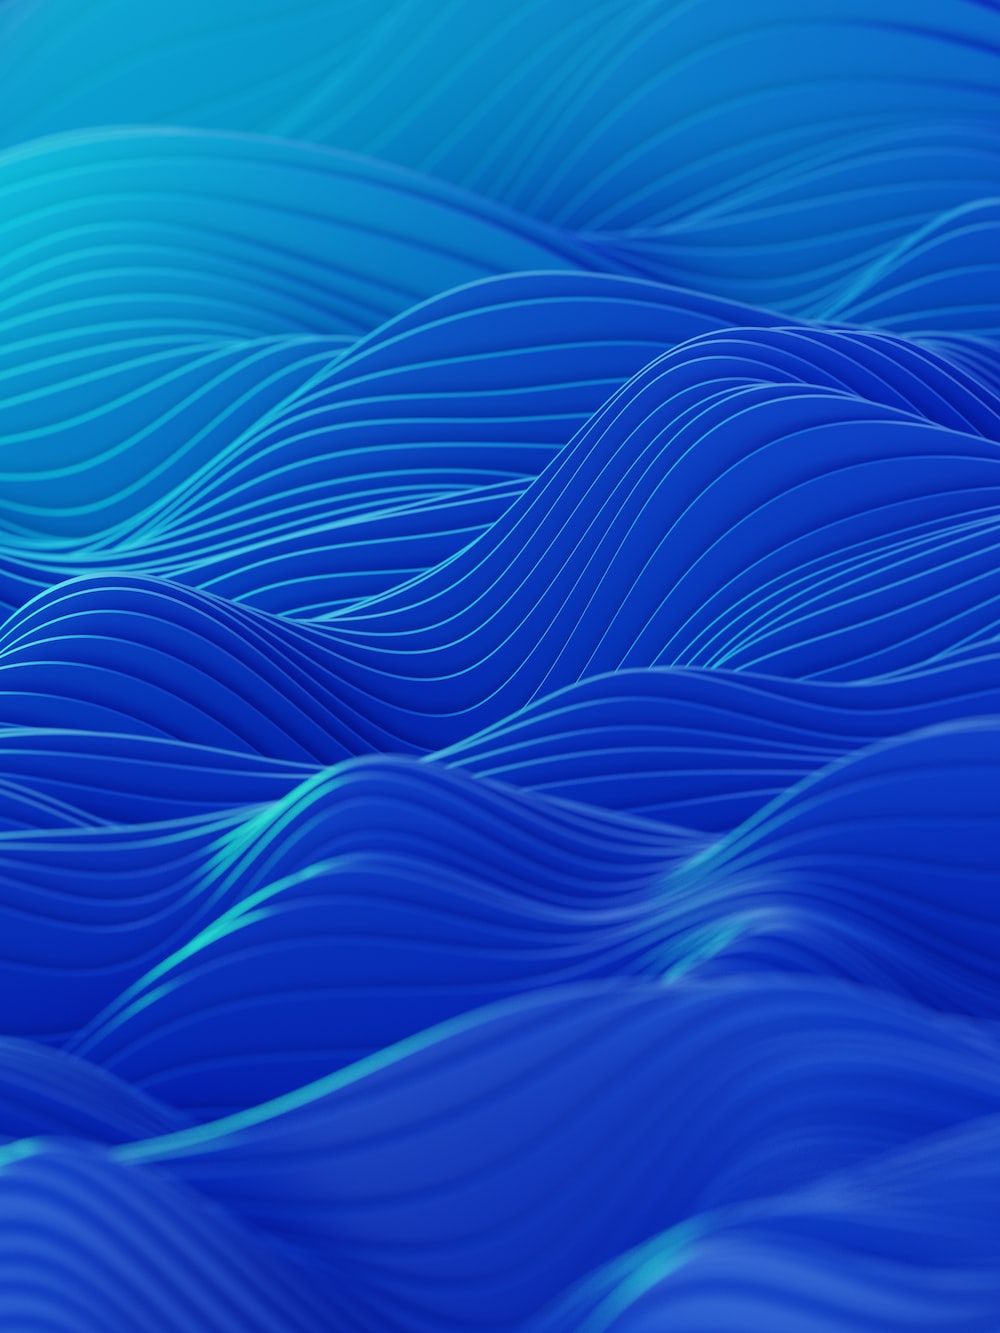 Blue Abstract Wallpapers